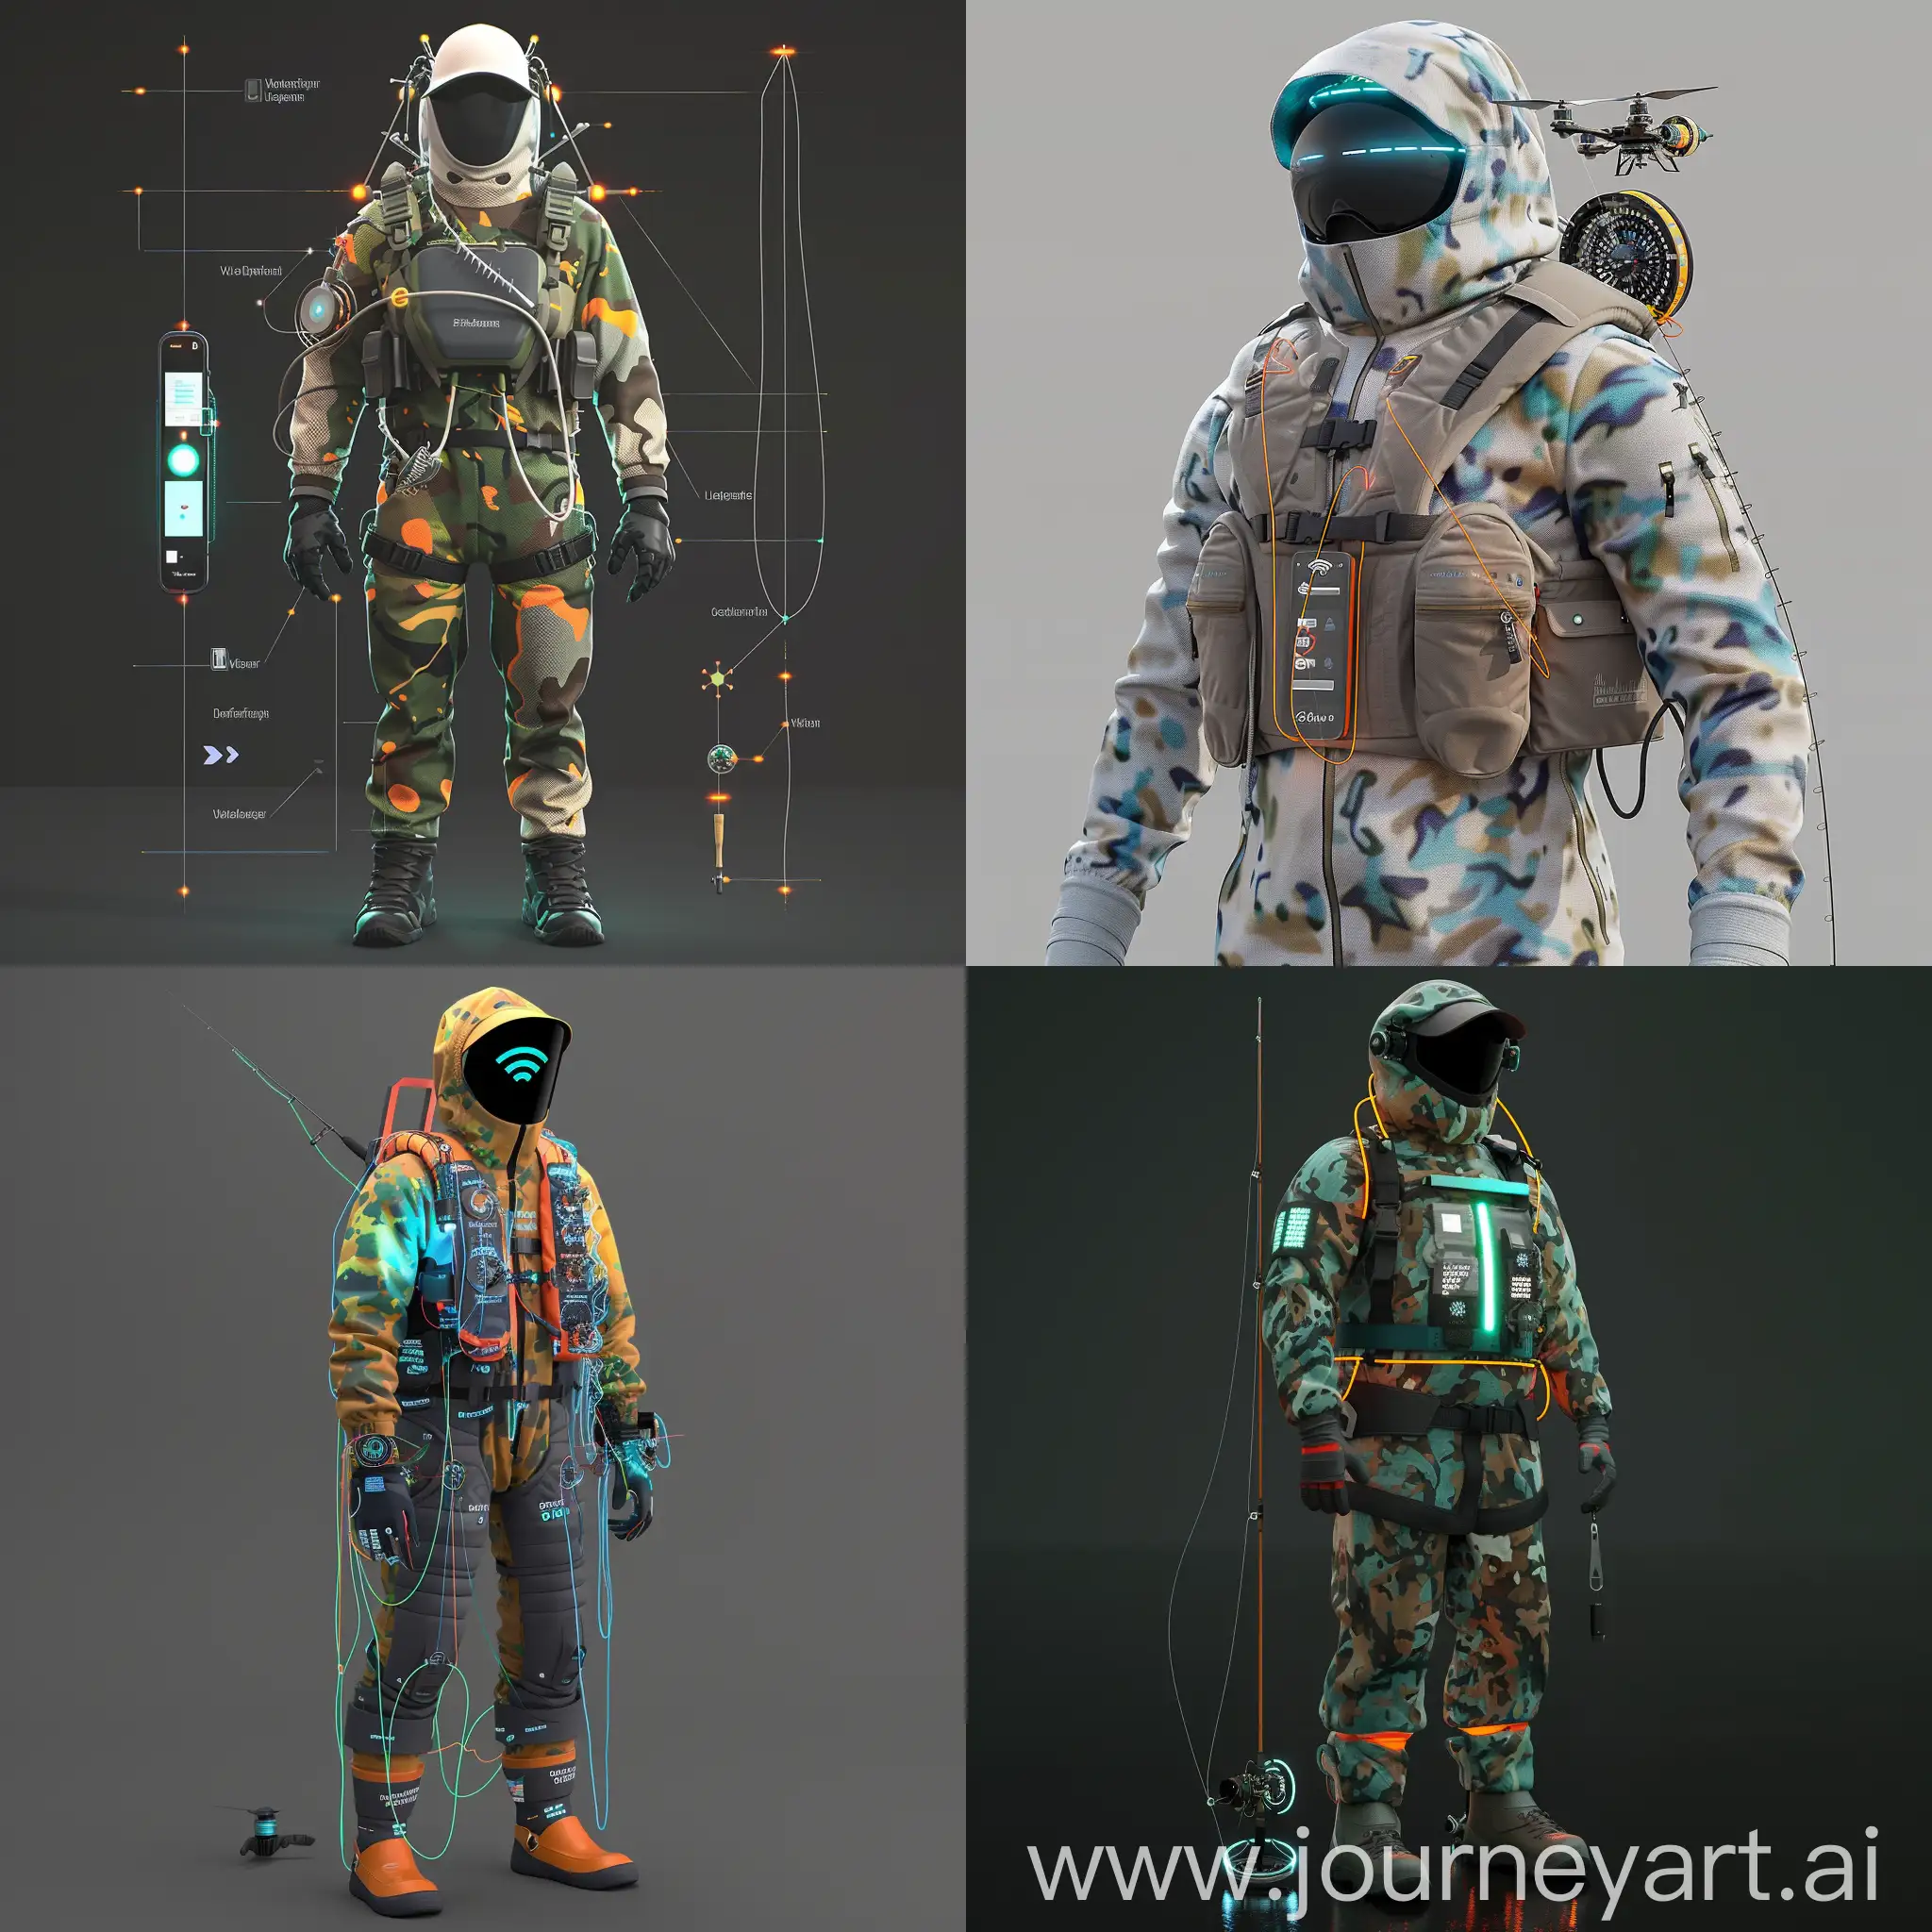 Futuristic-Fisherman-Costume-with-Integrated-Tech-Features